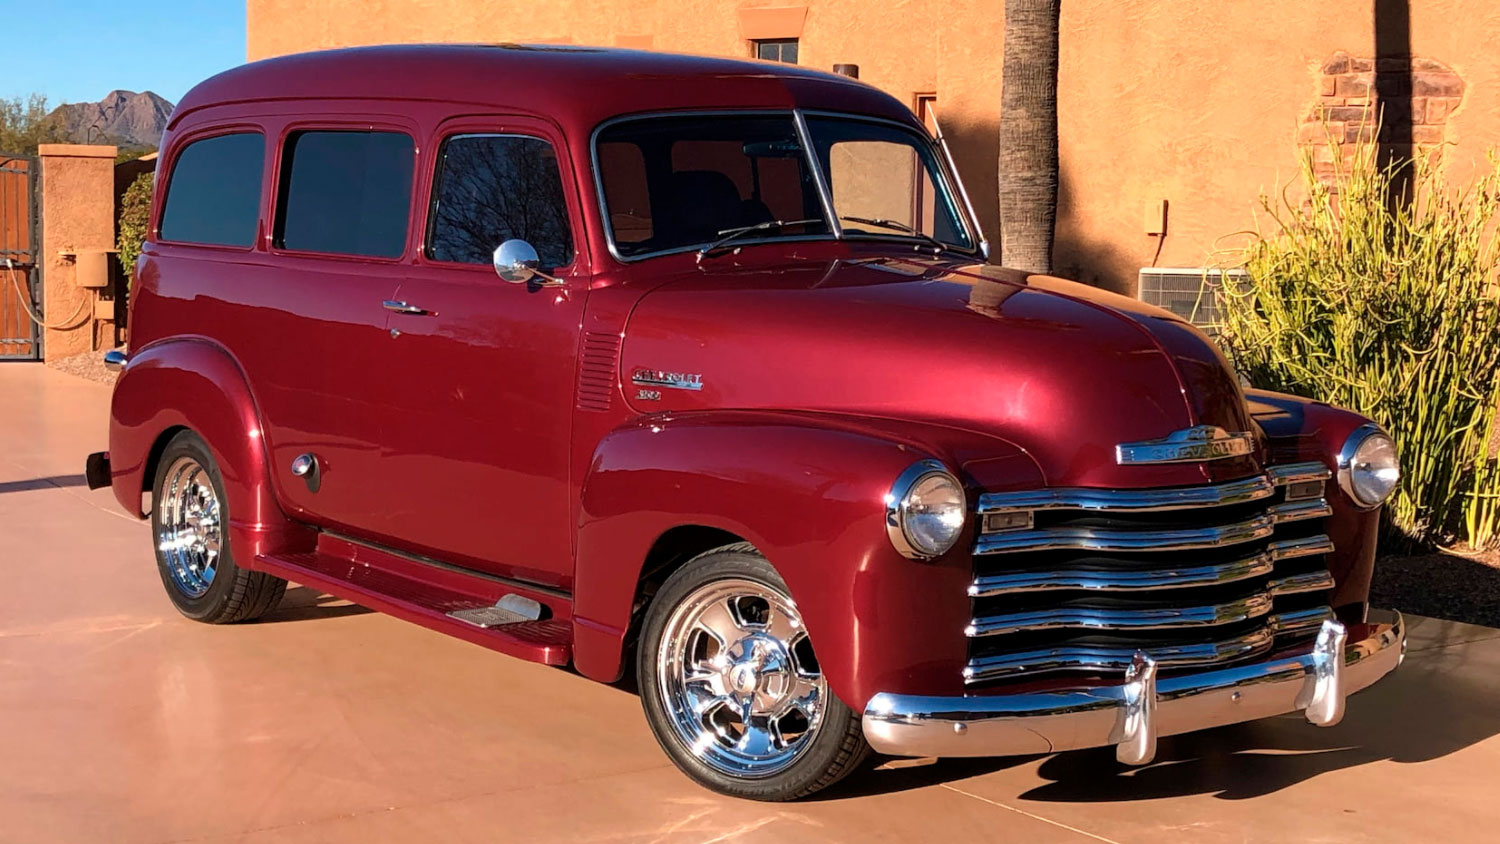 1948 Chevrolet Suburban Carry-all, This vehicle was on disp…